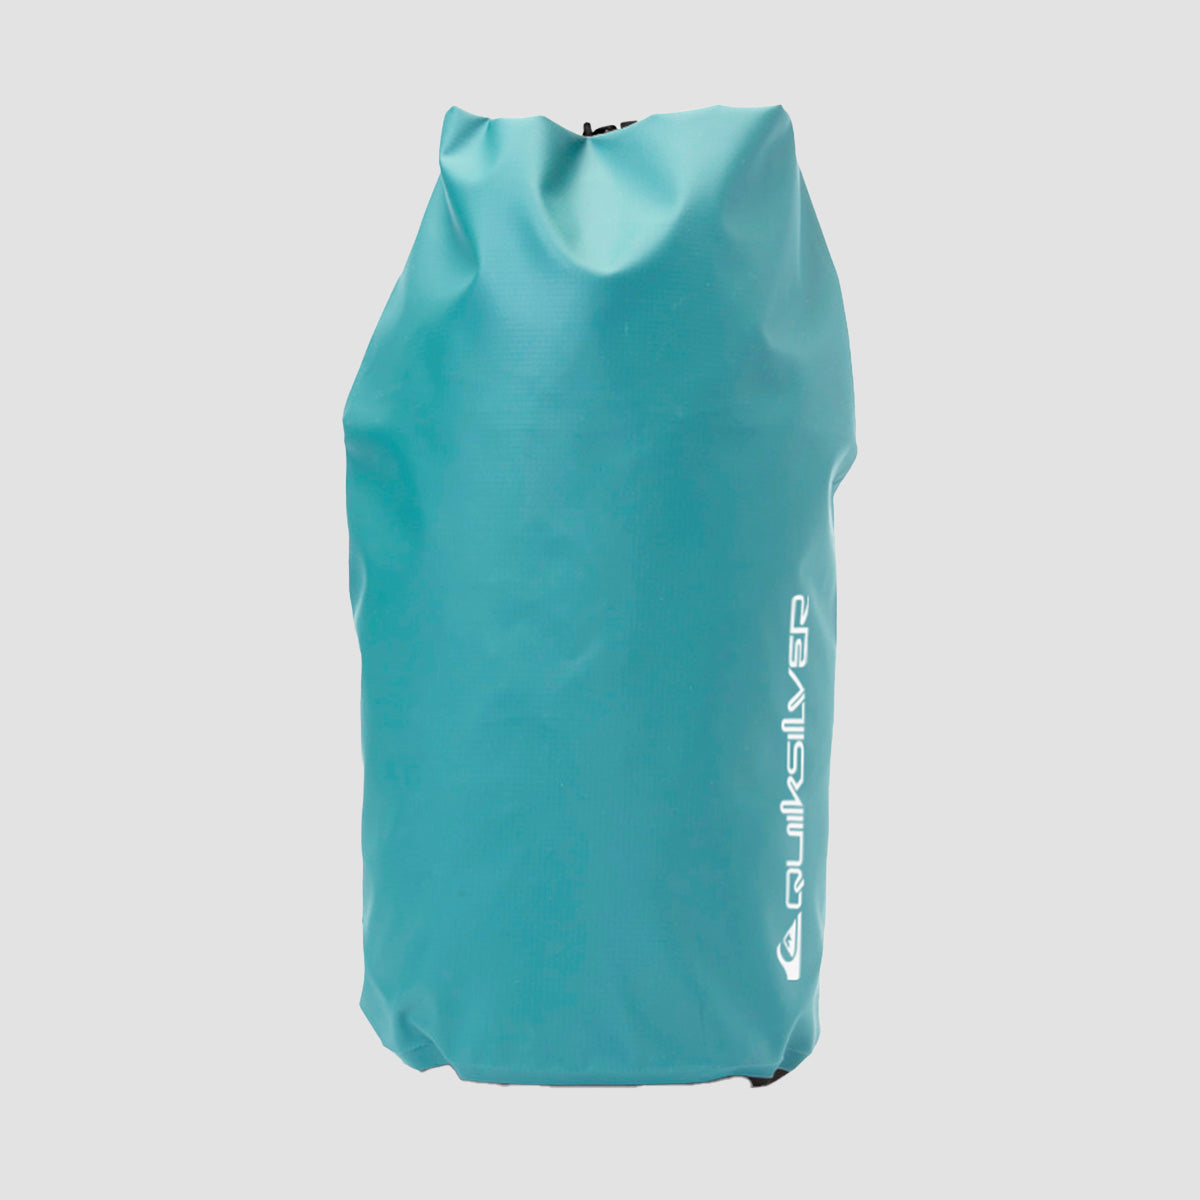 Quiksilver Small Water Stash 5L Surf Bag Marine Blue